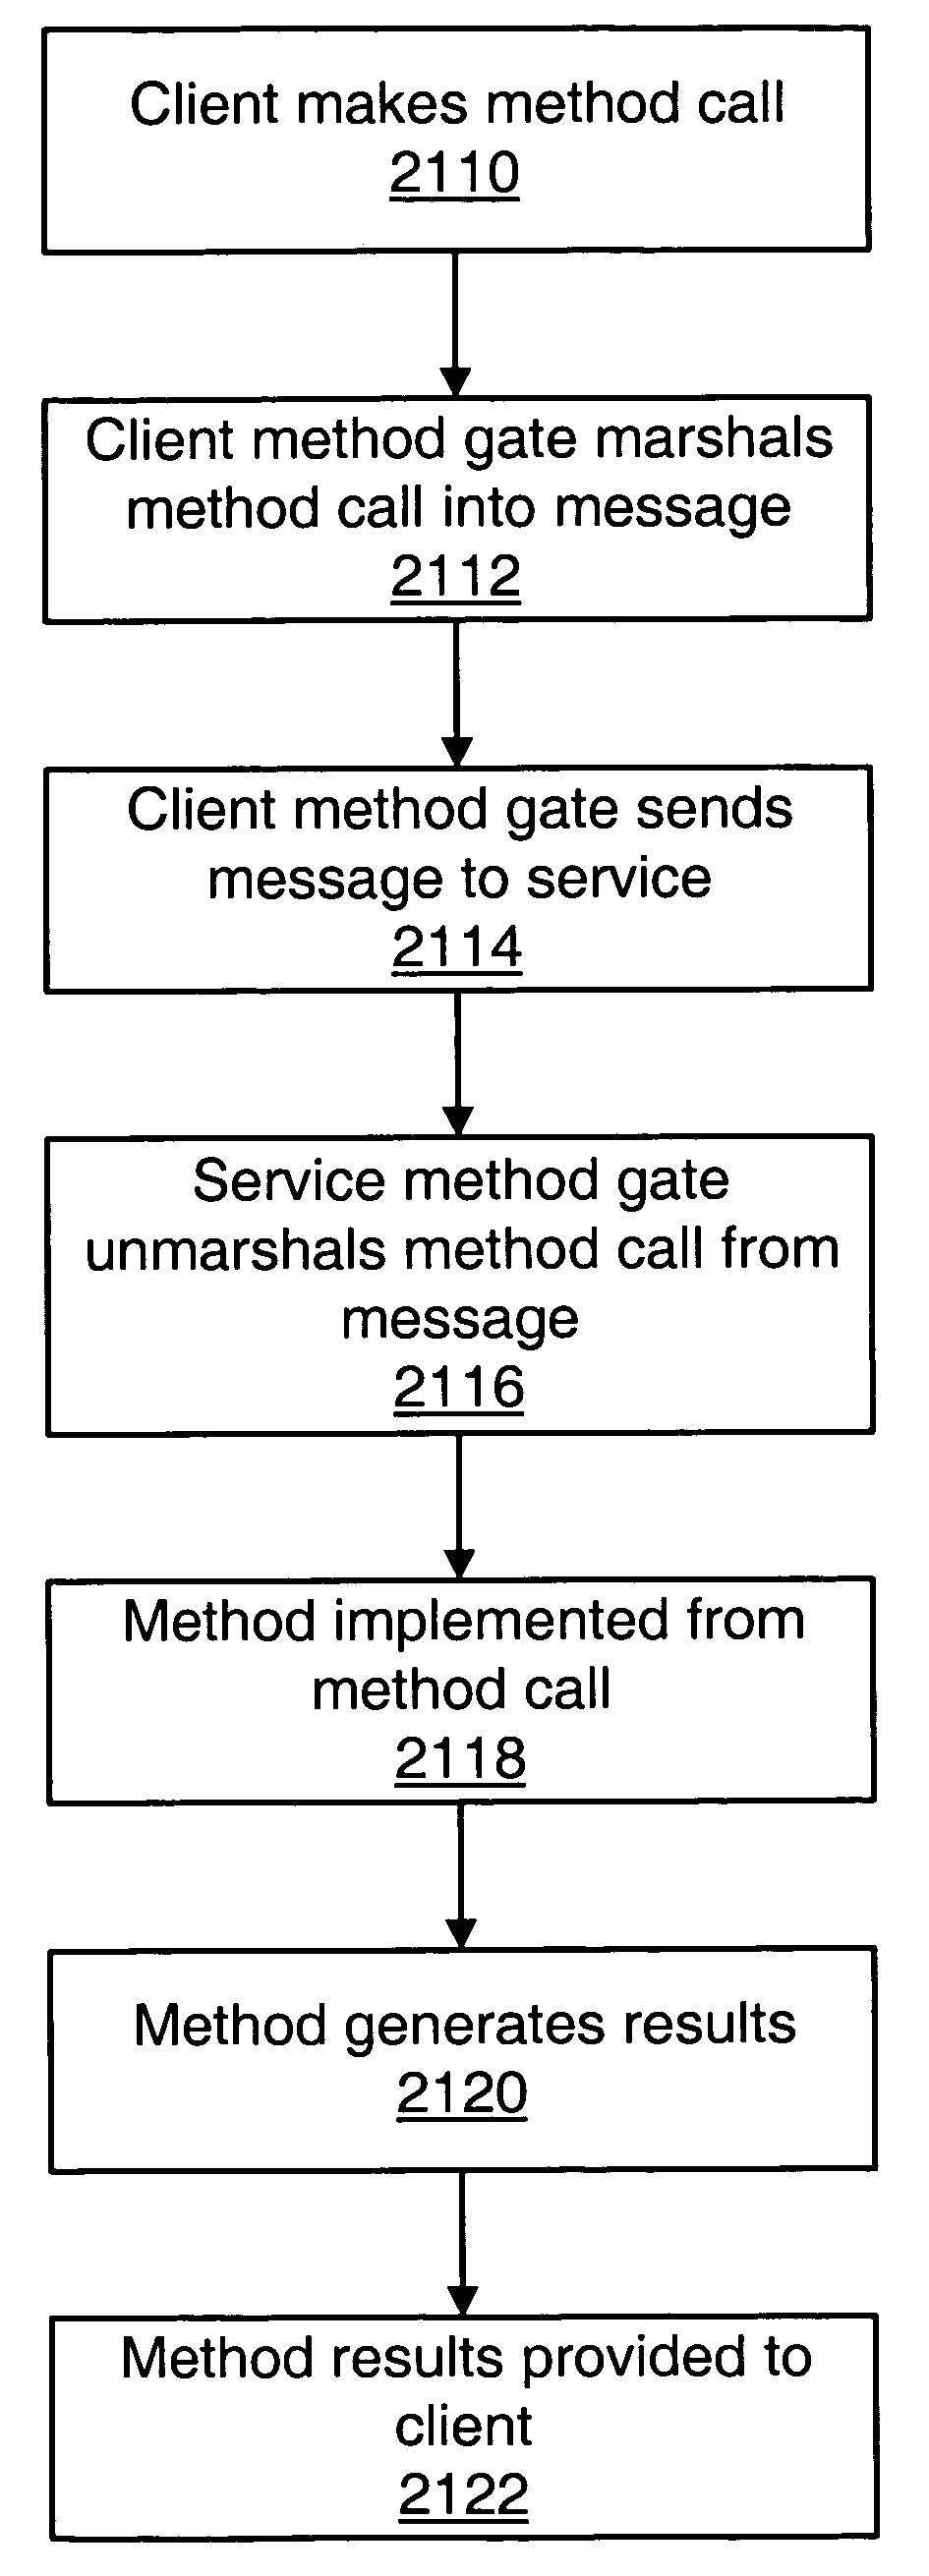 Generating results gates in a distributed computing environment